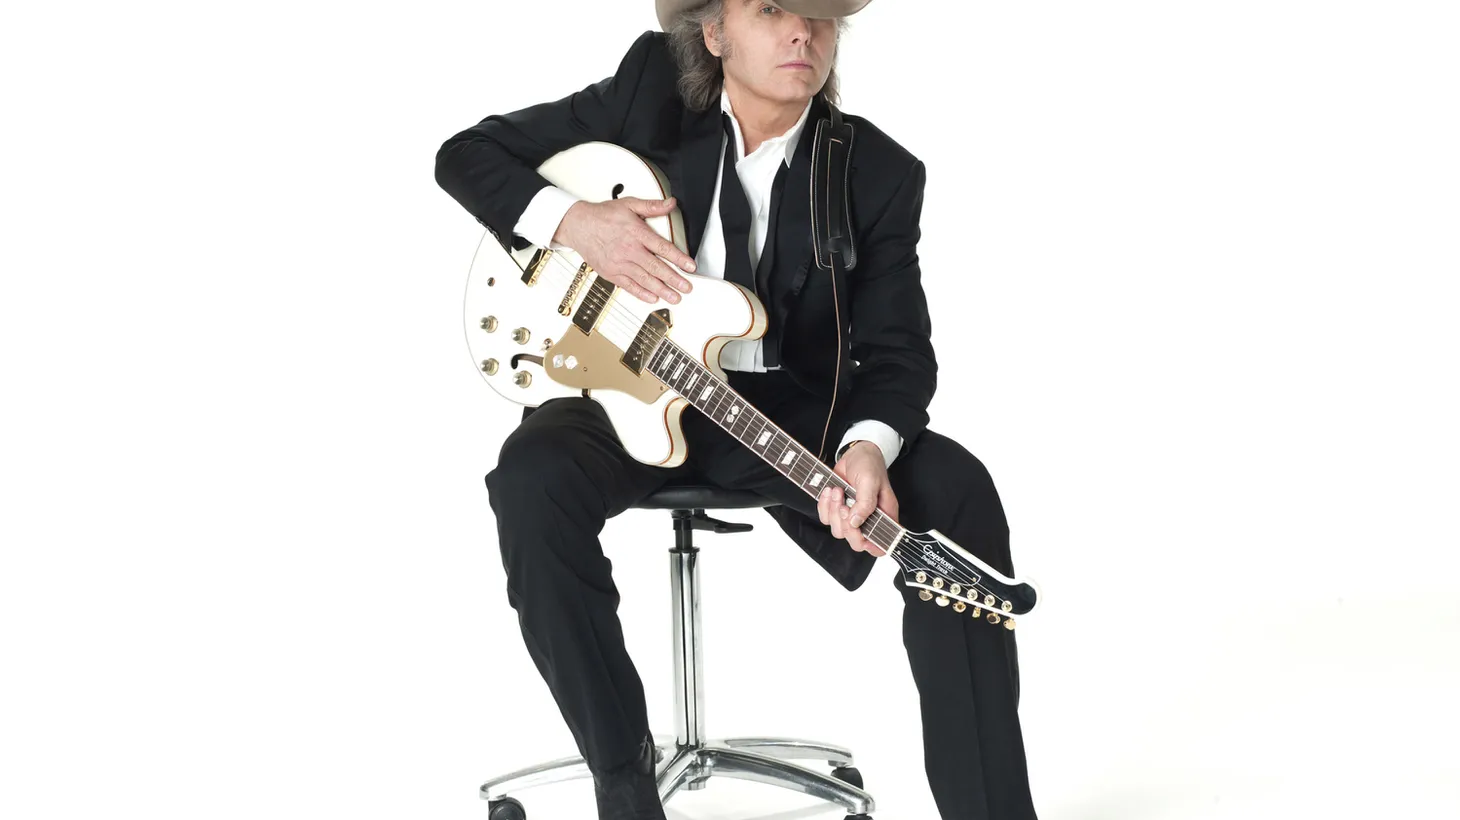 Dwight Yoakam has sold 25 million records worldwide thanks to his unique combo of rock and country.